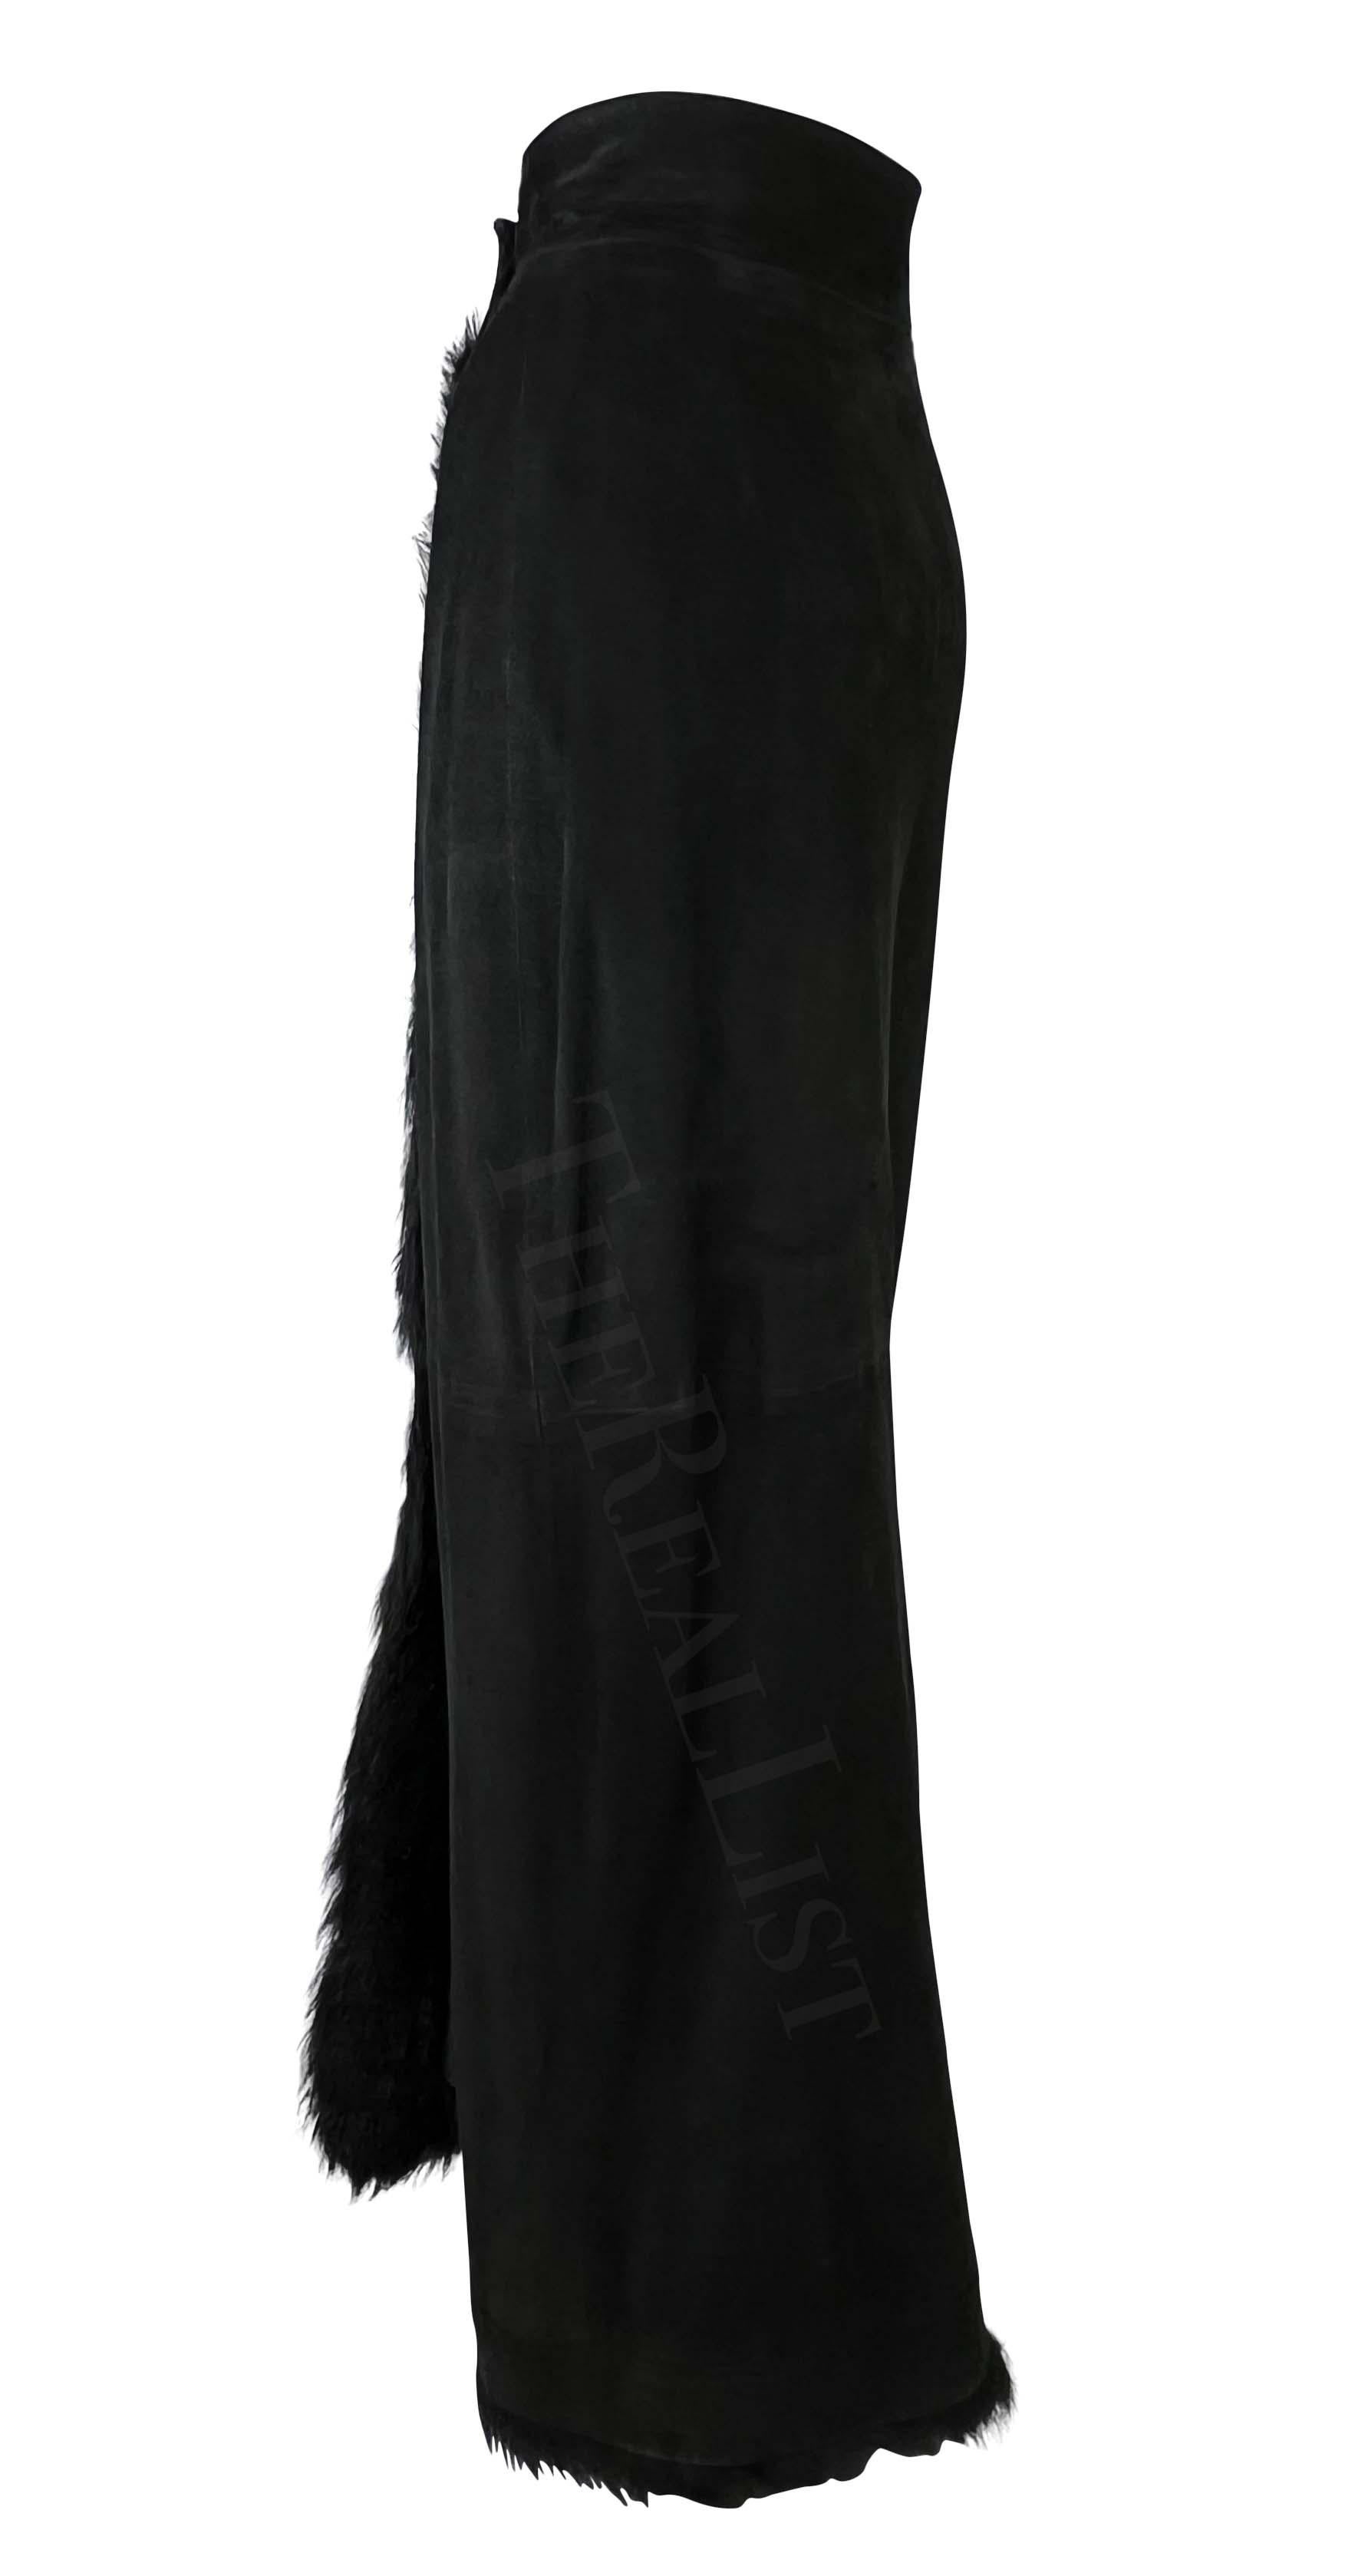 F/W 1996 Gucci by Tom Ford Runway Black Suede Fur Wrap Maxi Slit Skirt For Sale 2